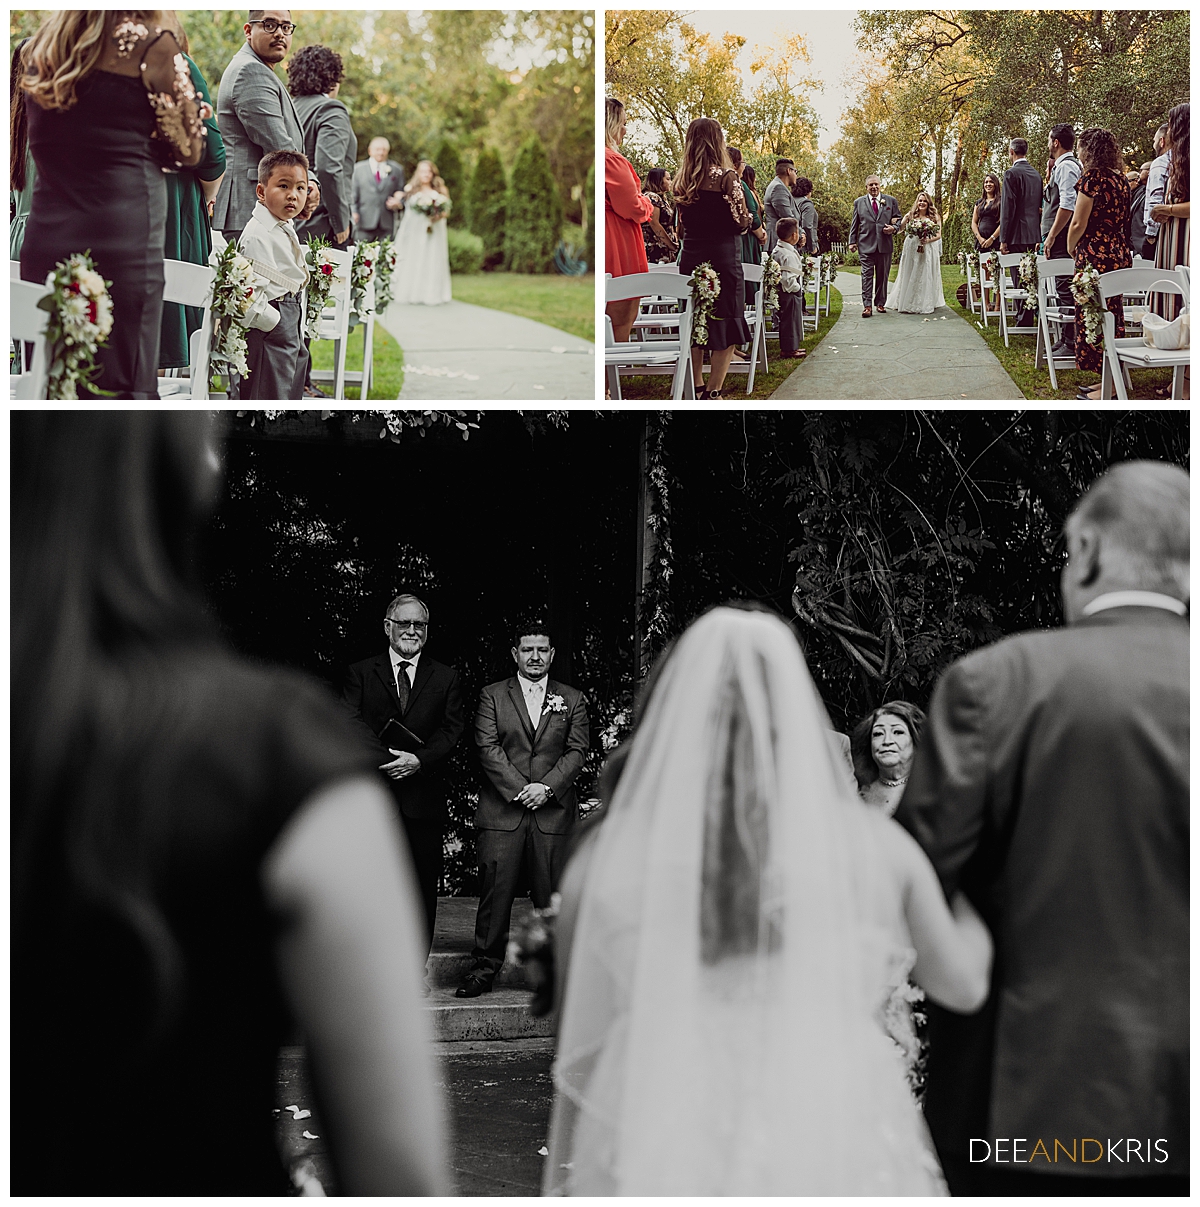 Three images: Top left color image of ring bearer looking back at camera with bride and father coming down the aisle. Top right color image of bride and her father walking down the aisle. Bottom black and white image groom looking tearful as bride walk down the aisle with her father.